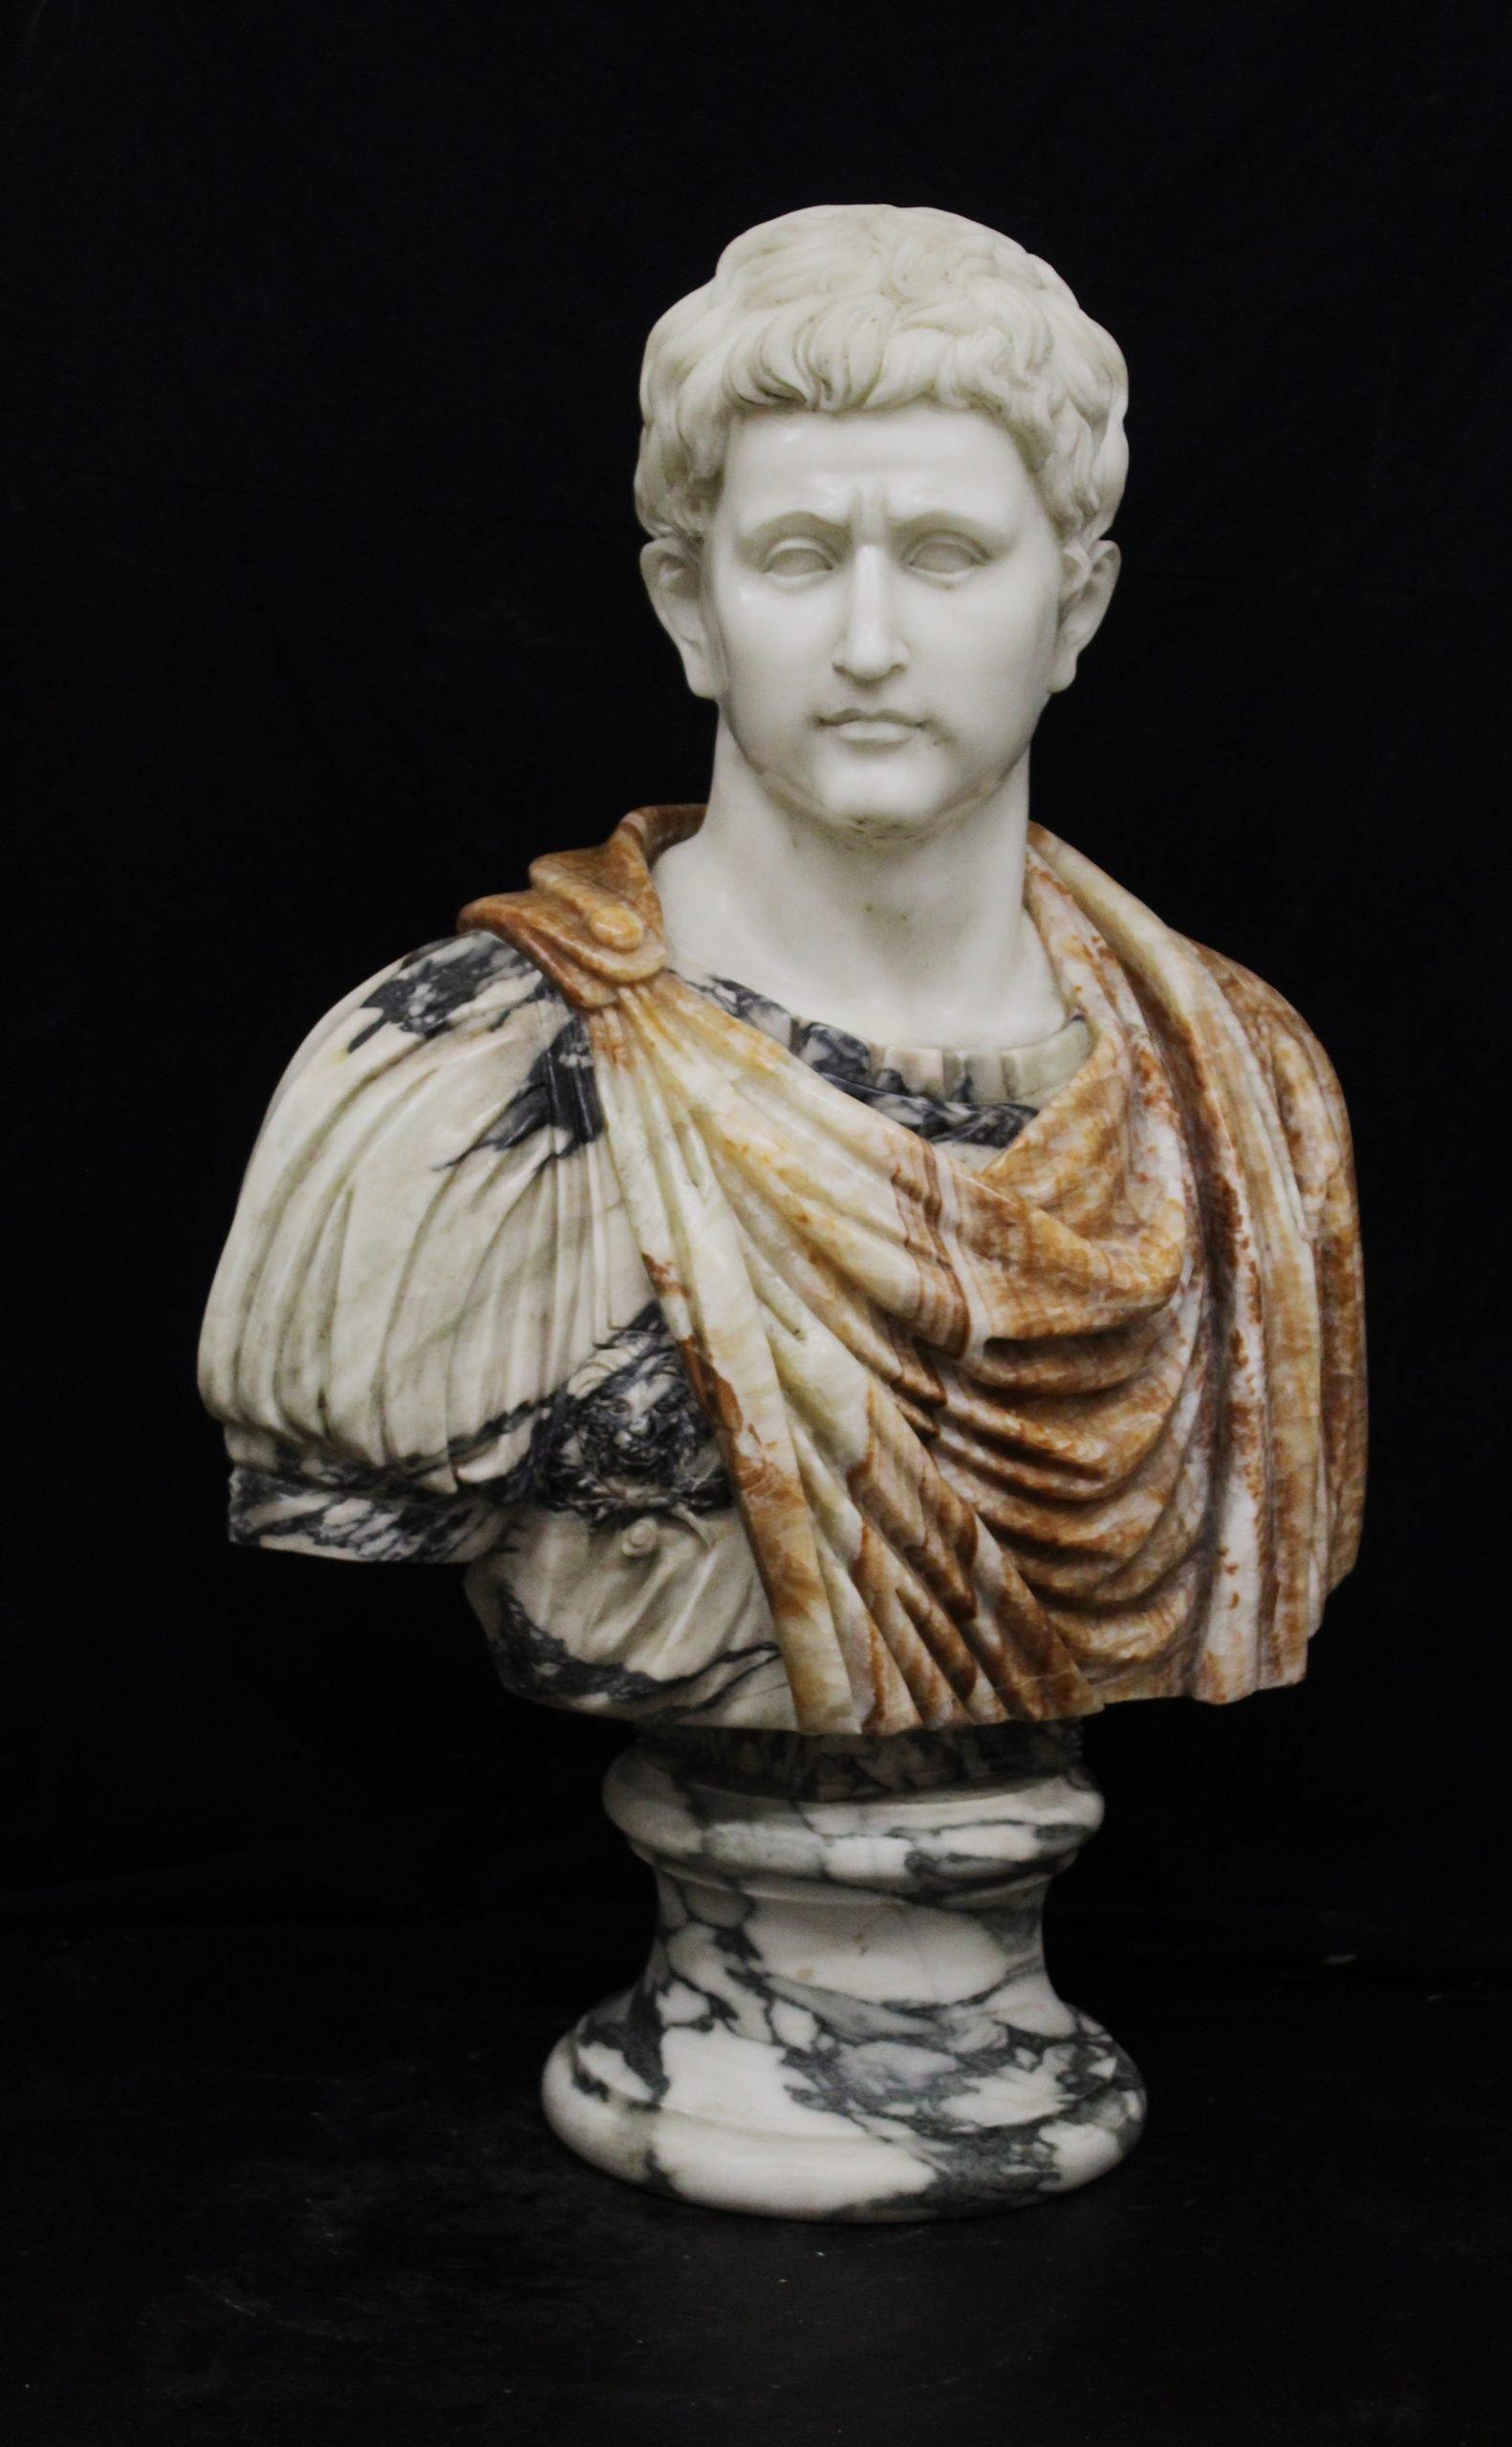 Large bust of emperor in polychrome marble, with bust in onyx,  Bust in Carrara marble, sculpture in marblegrande Busto di Imperatore in marmi Policromi, con Busto in onice